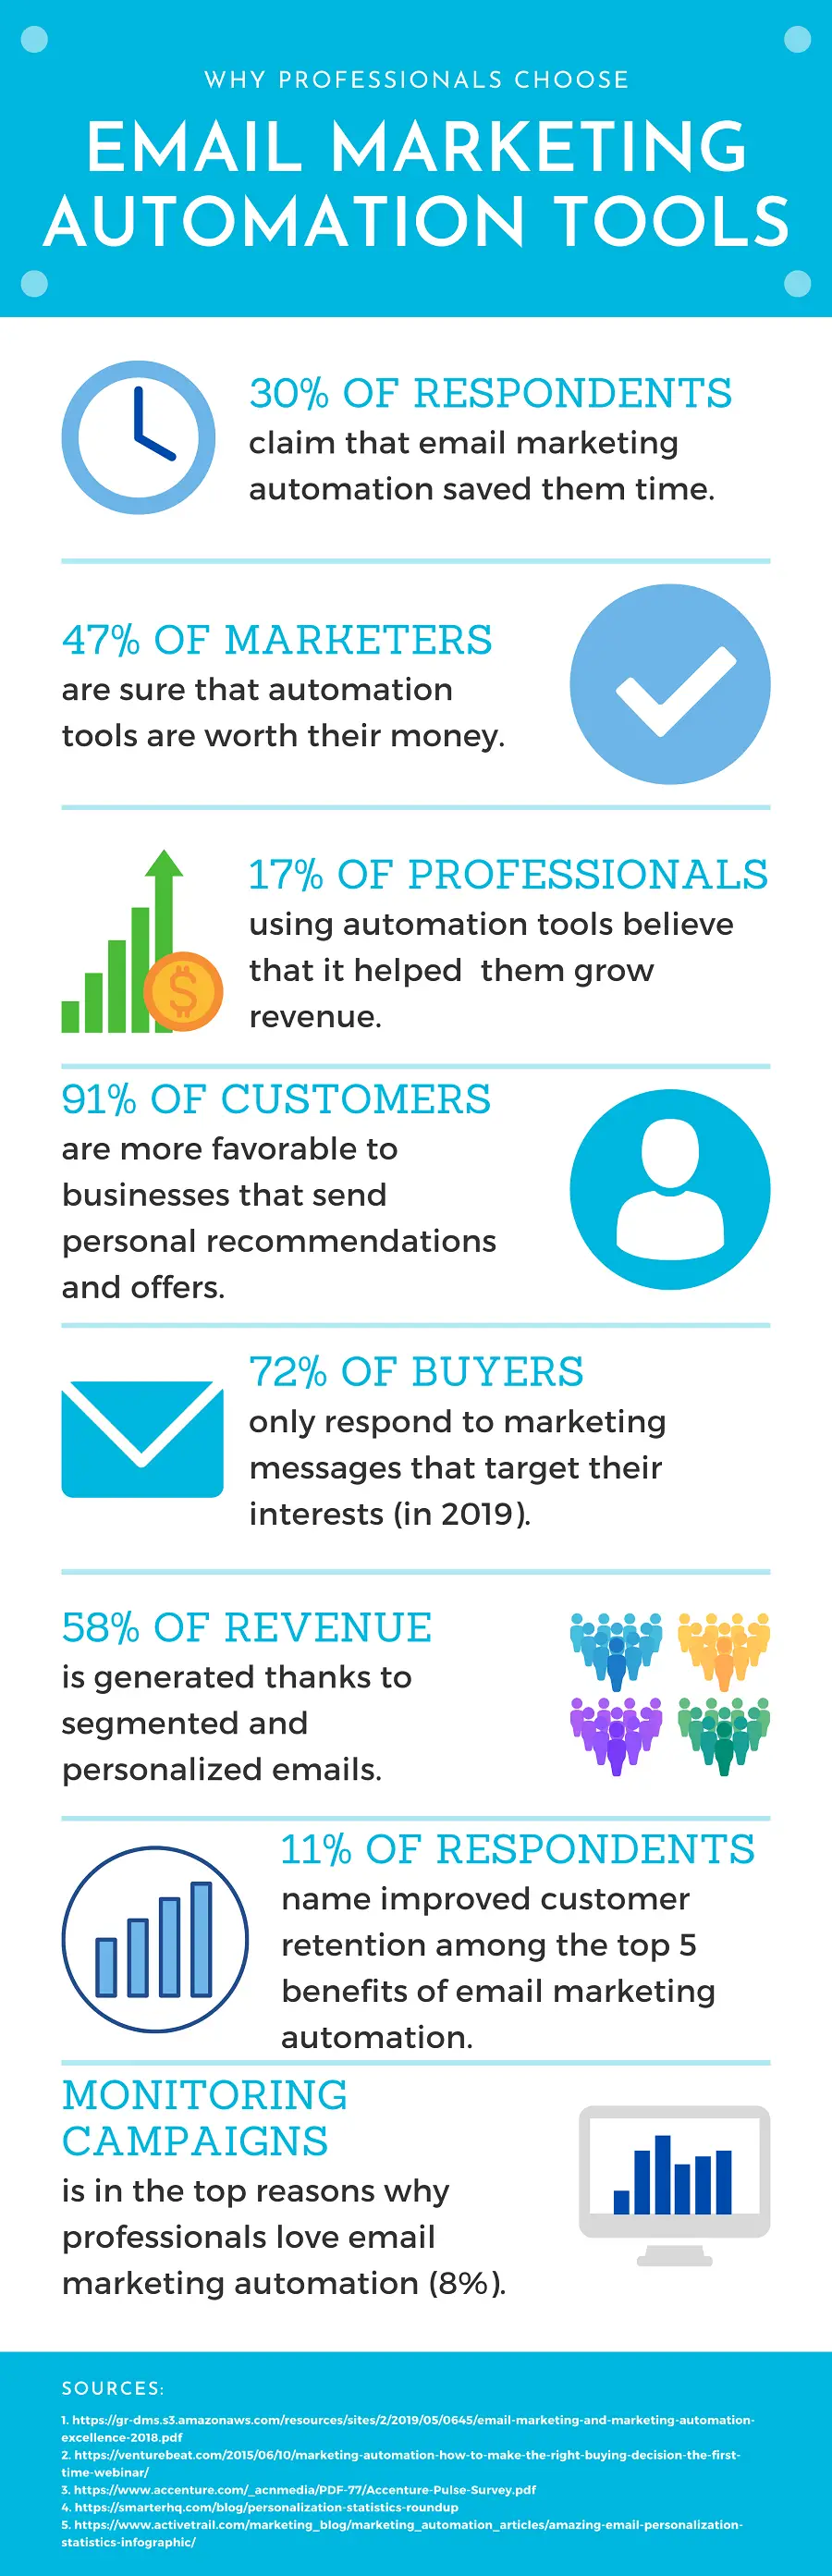 email_marketing_automation_statistics_infographic.png